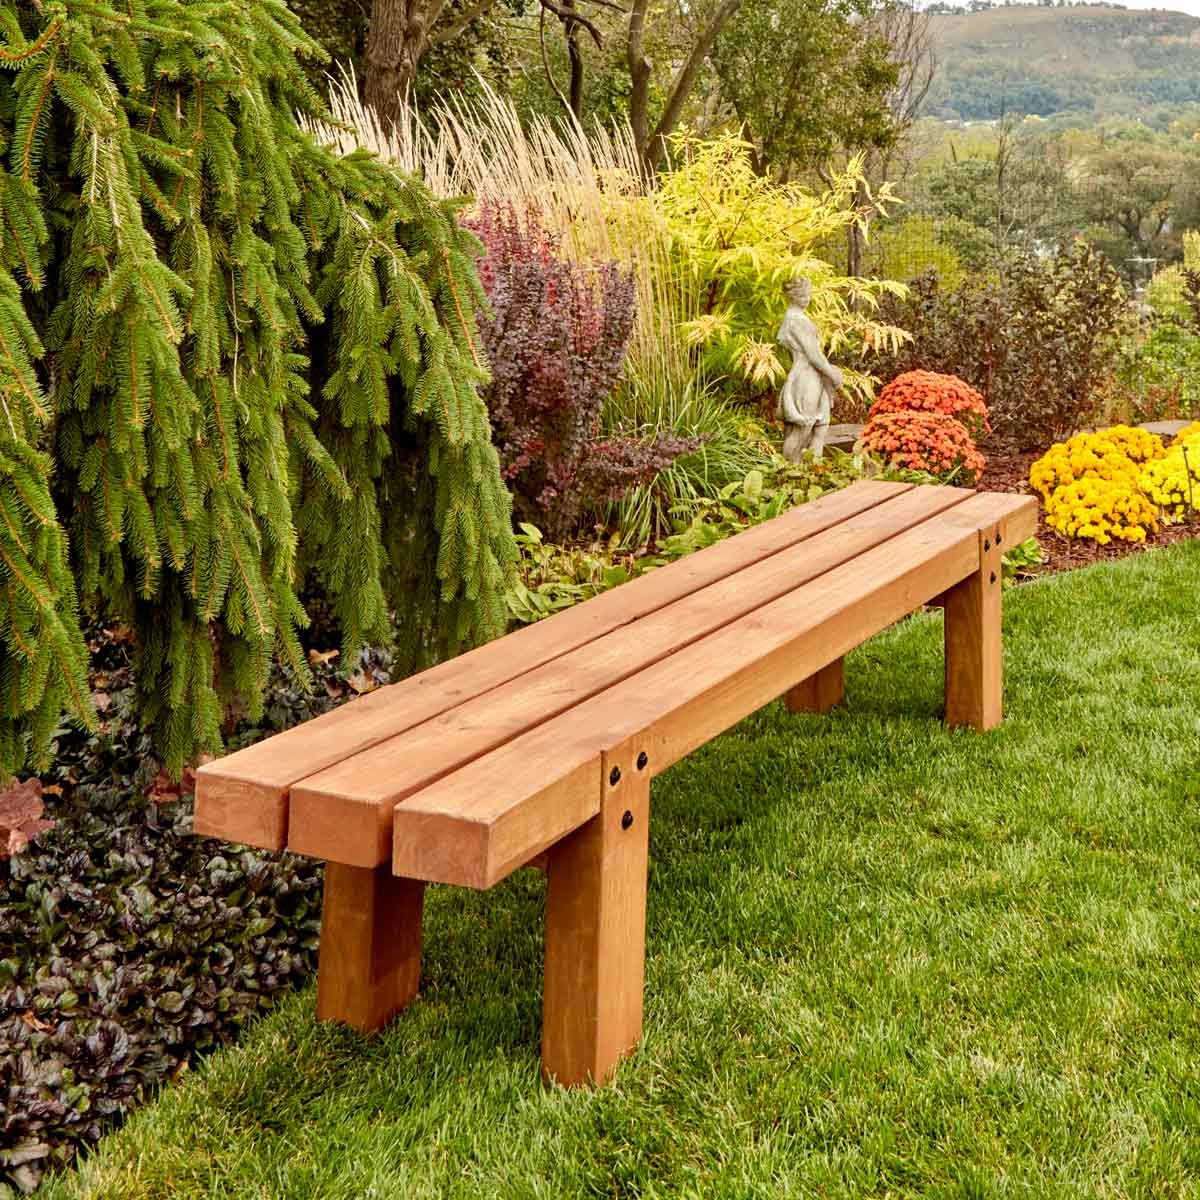 How to Make Simple Timber Bench (DIY) | Expert Guidance from Family